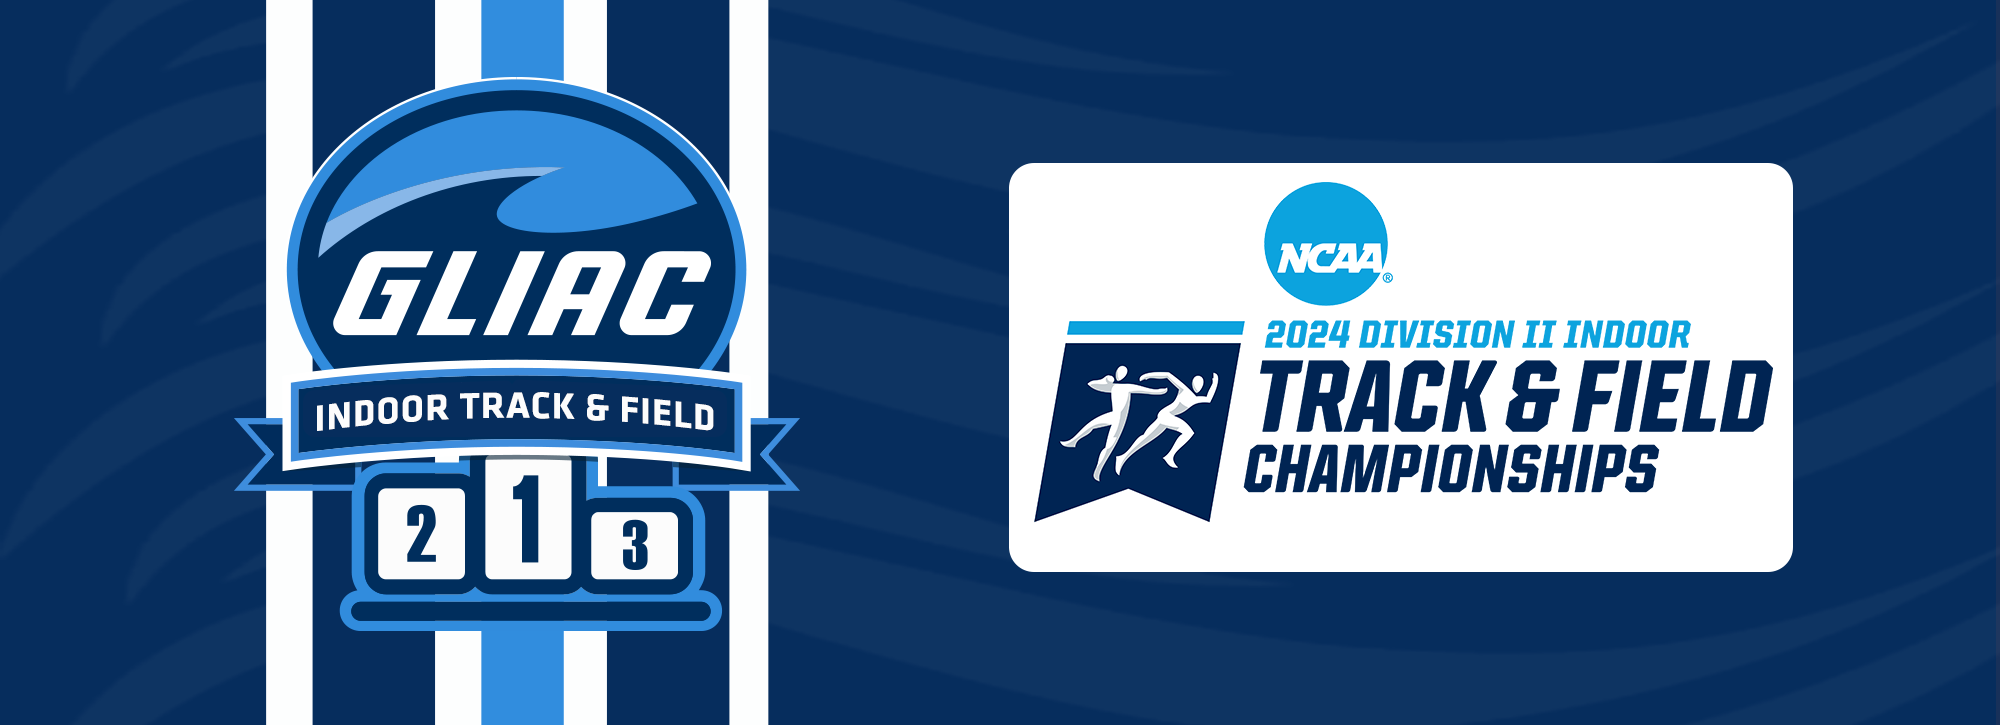 GLIAC athletes qualify for NCAA Division II Men's and Women's Indoor Track & Field Championships